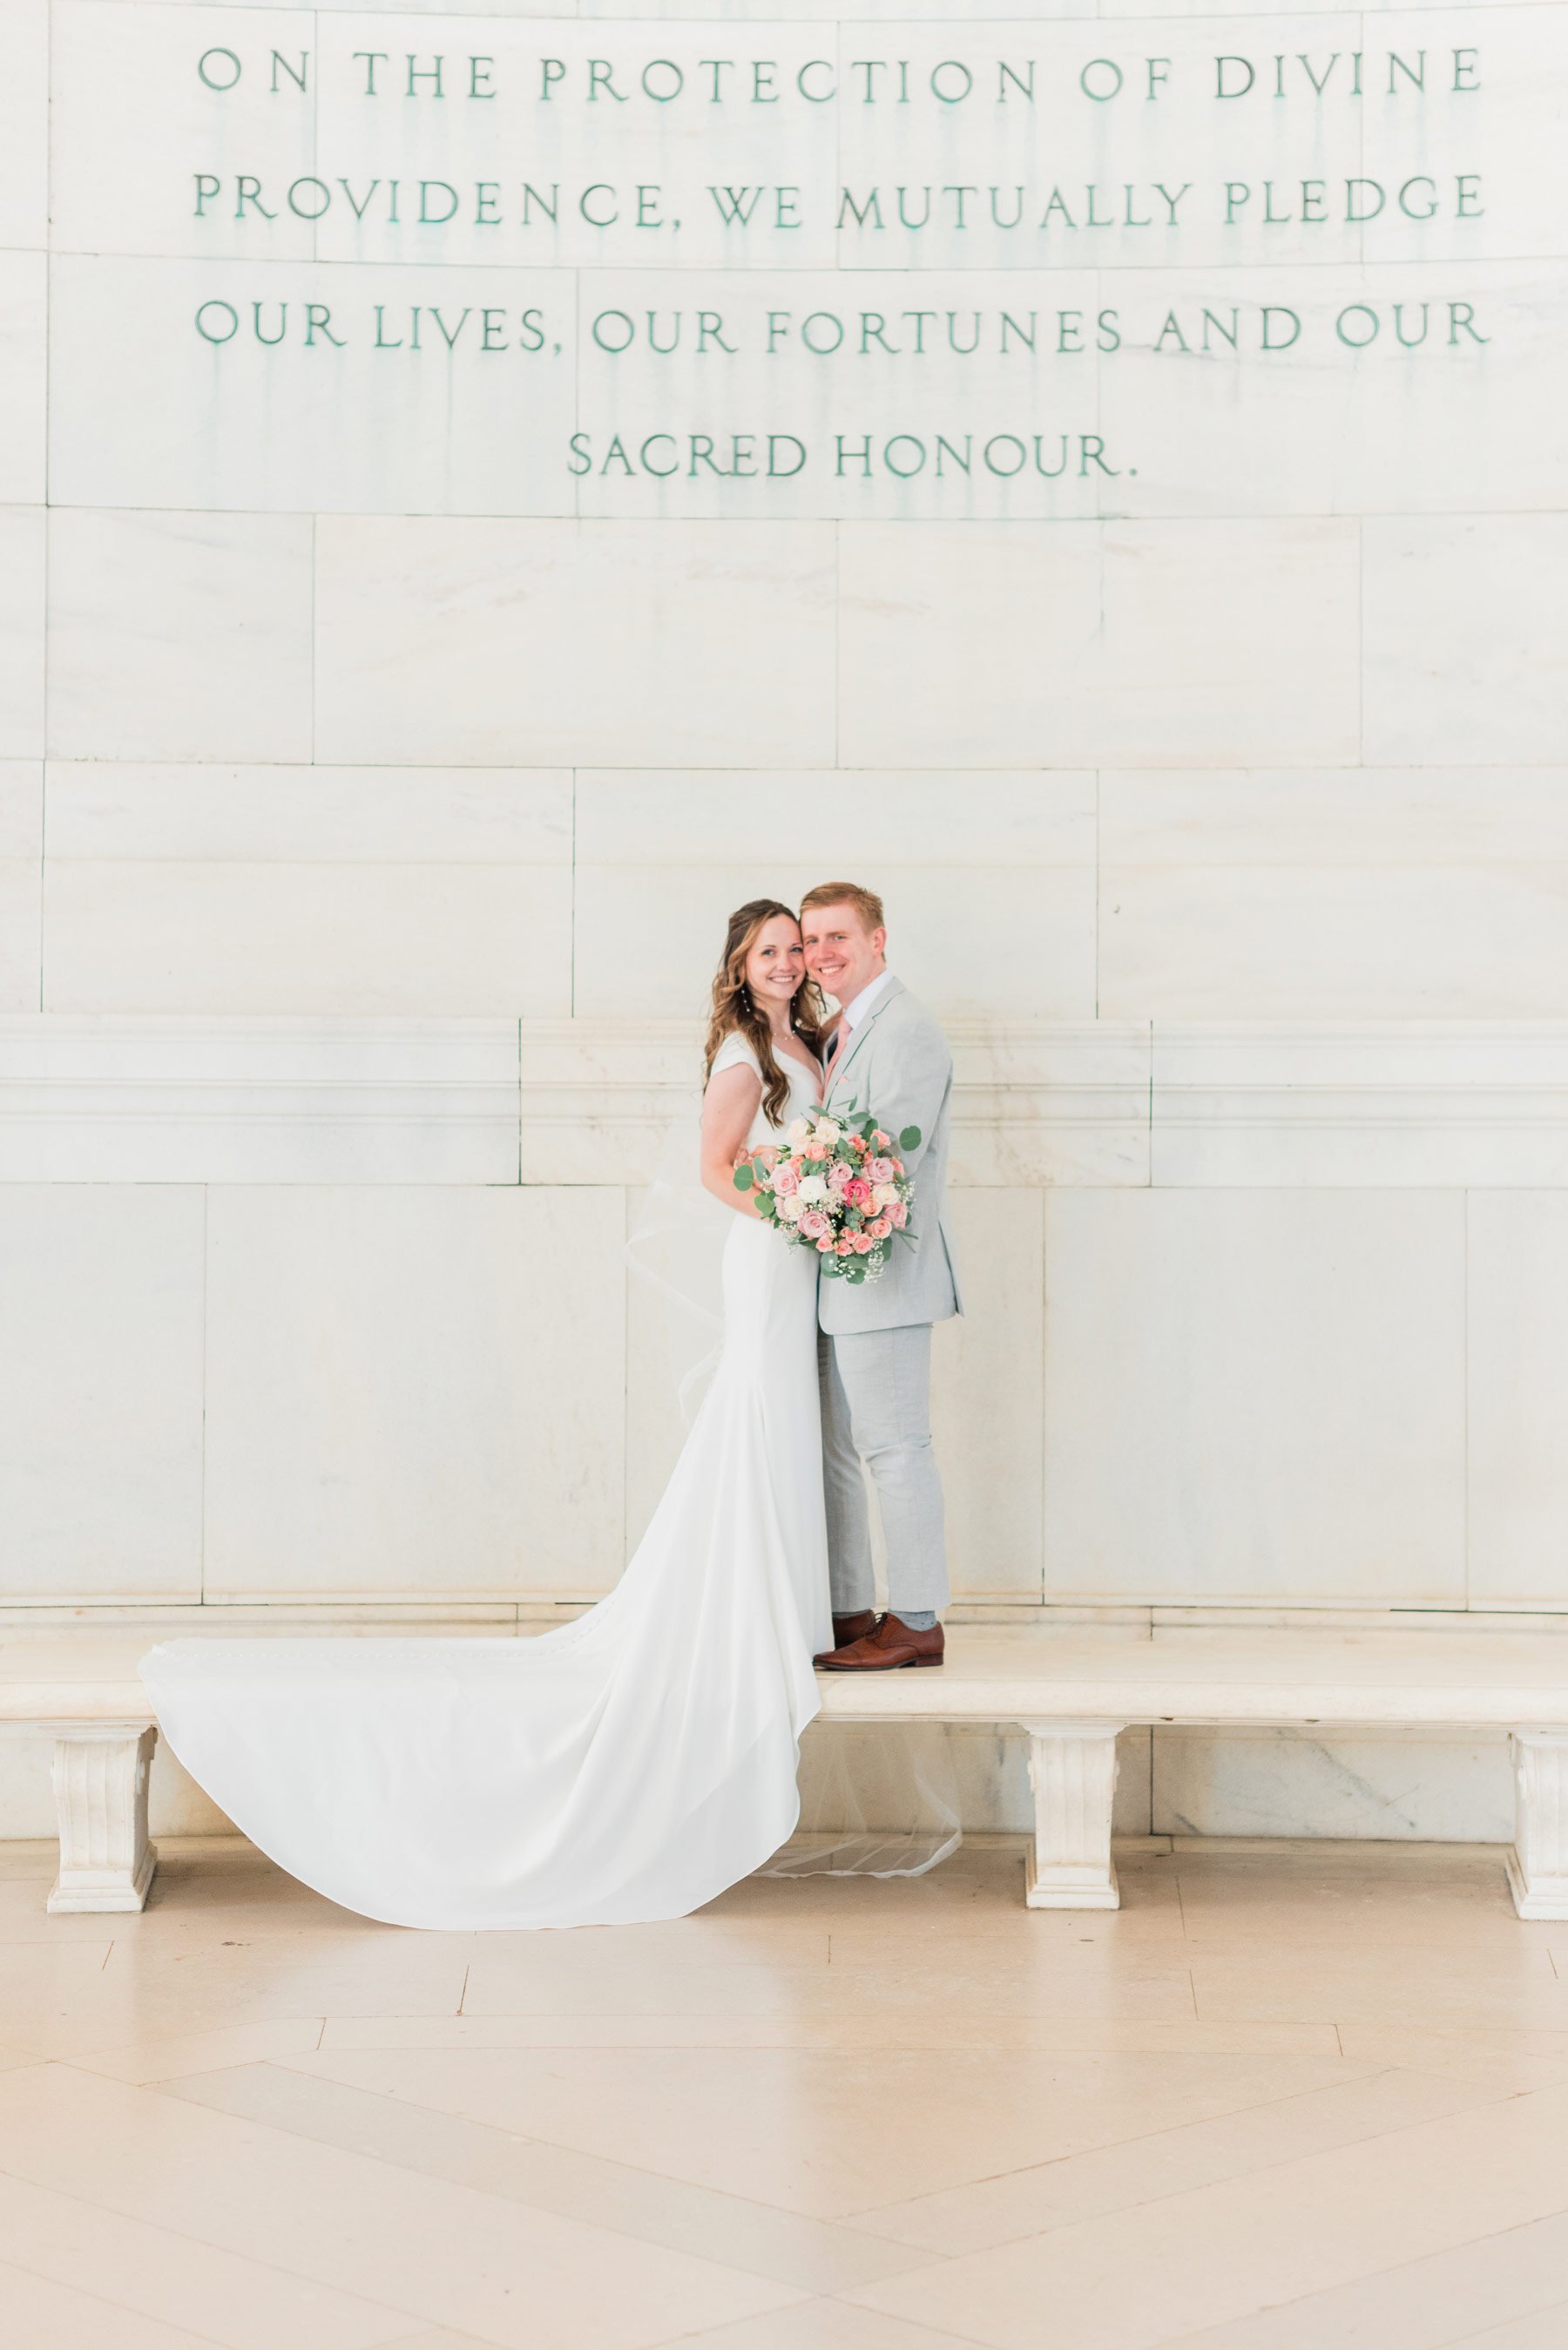    A Benjamin Franklin quote is featured in this wedding photo from a Washington DC bridal session. #washingtondcphotography #washingtondctemple #washingtondcwedding #dcweddingphotographer #washingtondctemplewedding #eastcoastweddingphotographer #sun